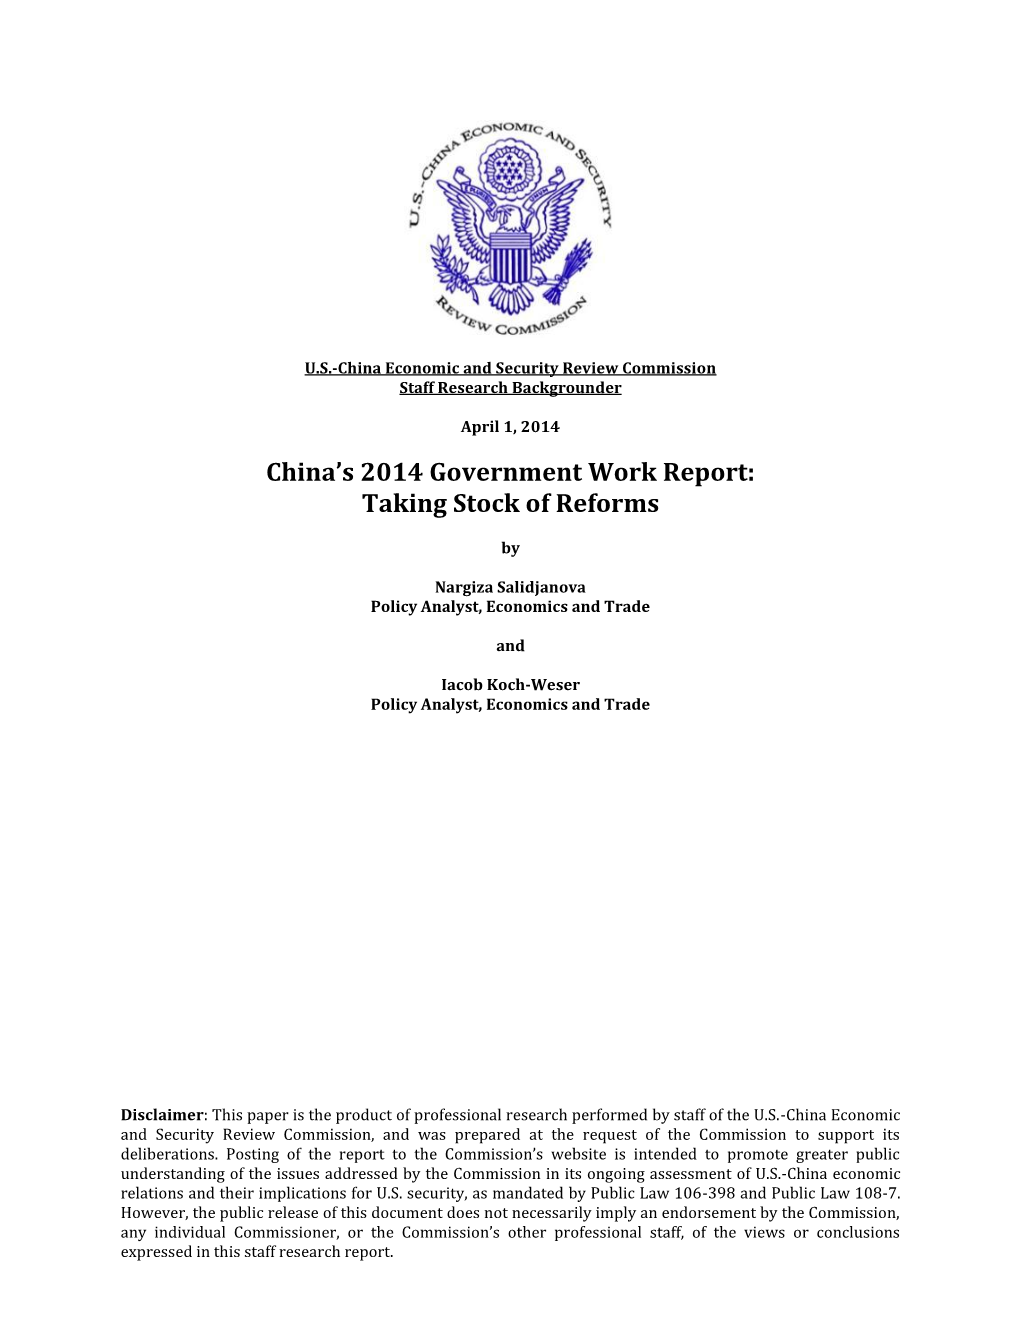 China's 2014 Government Work Report